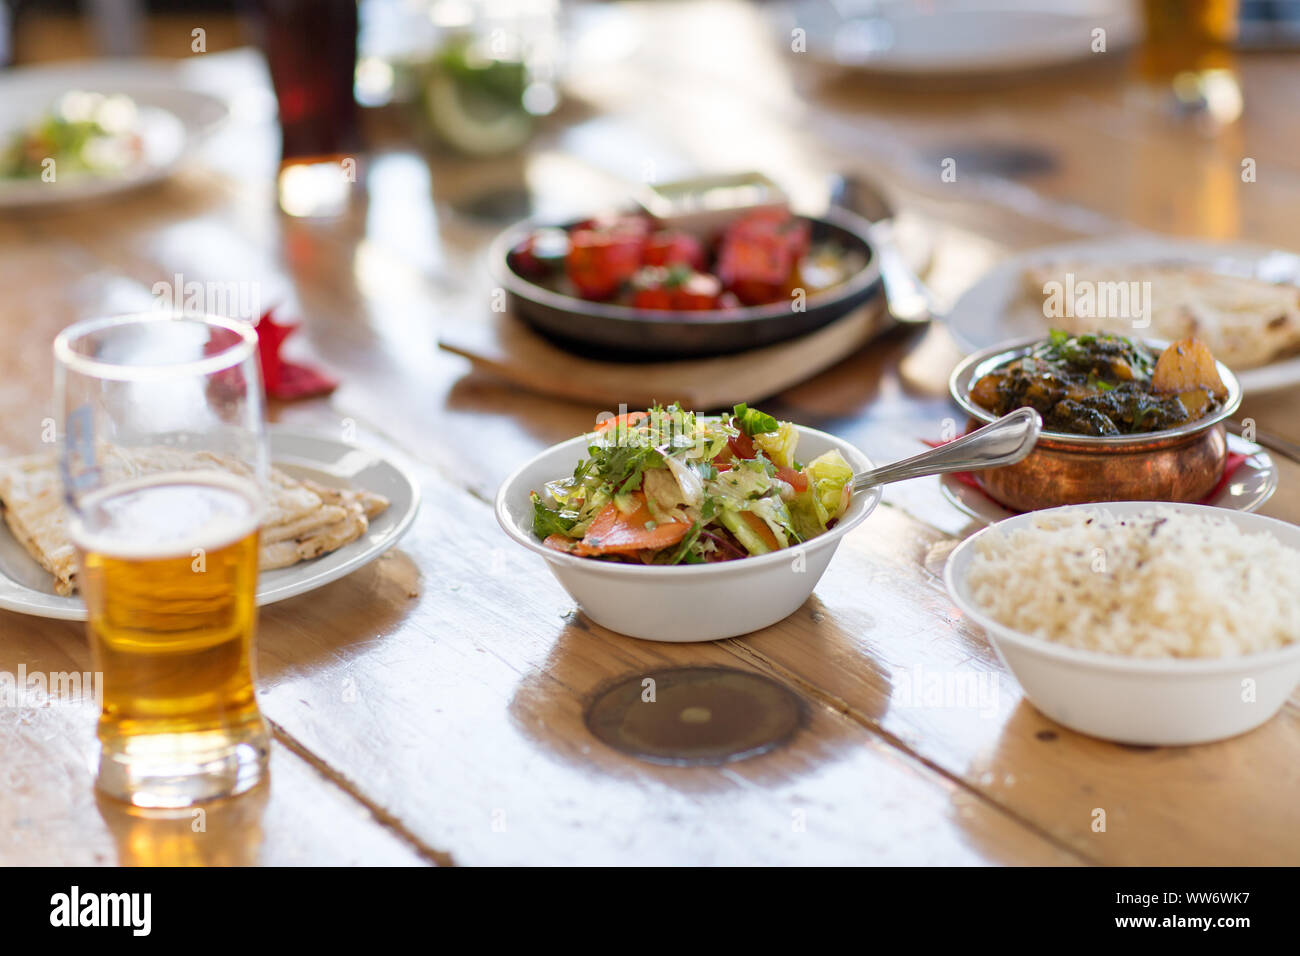 salad with other food on indian restaurant table Stock Photo